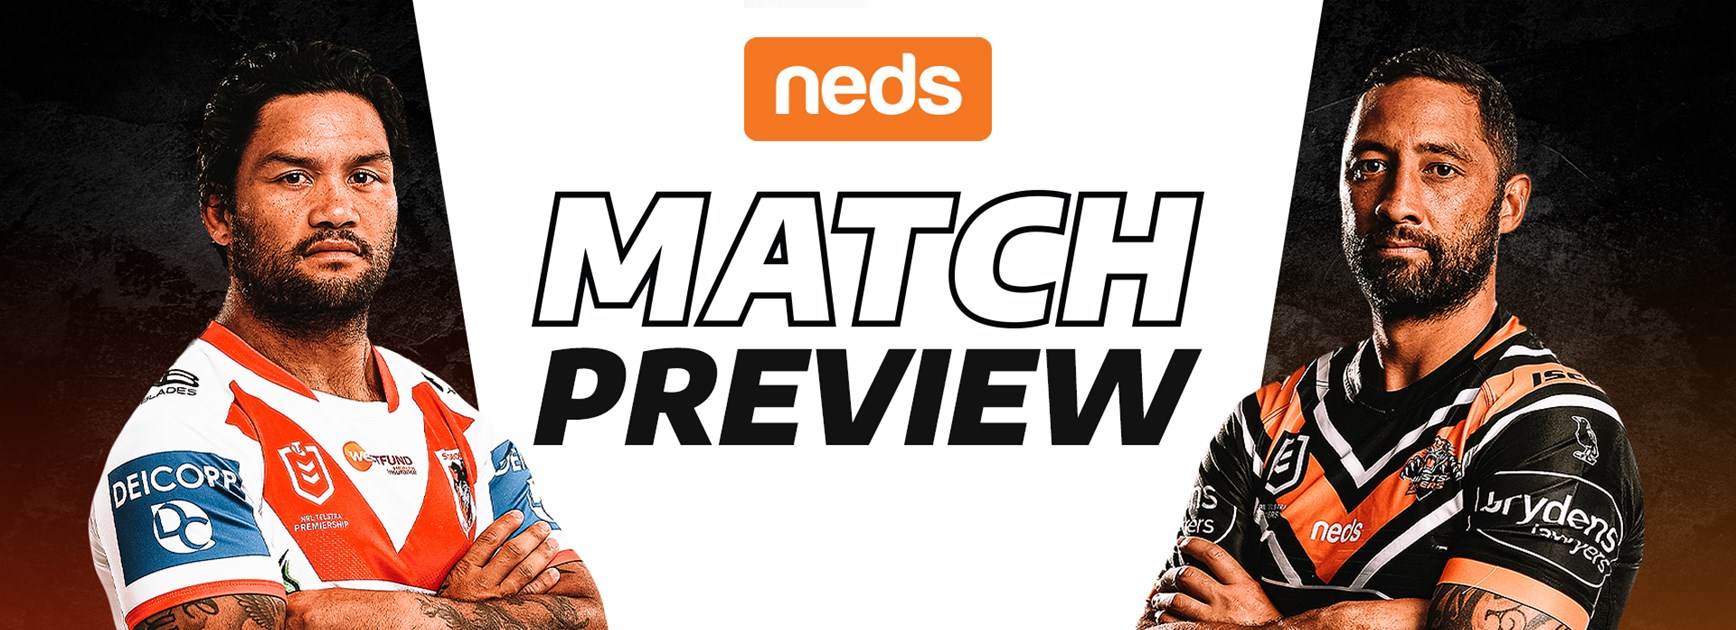 Neds Match Preview: Round 1